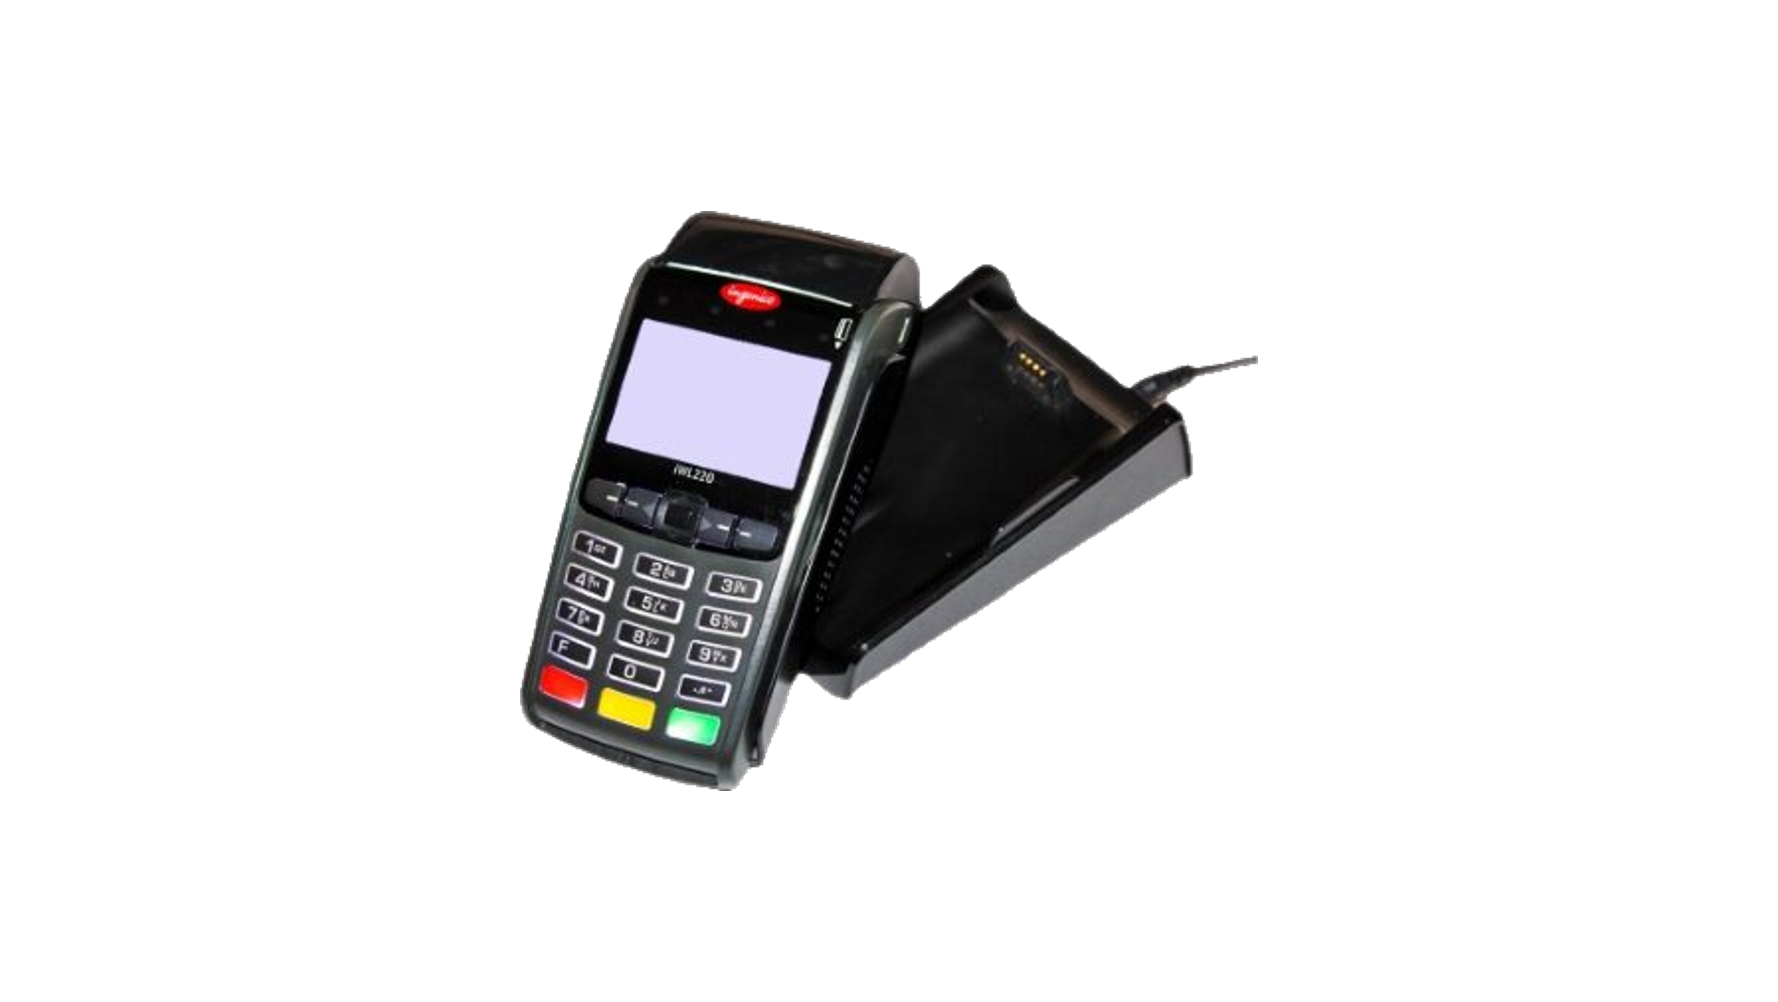 Epos with chip and pin